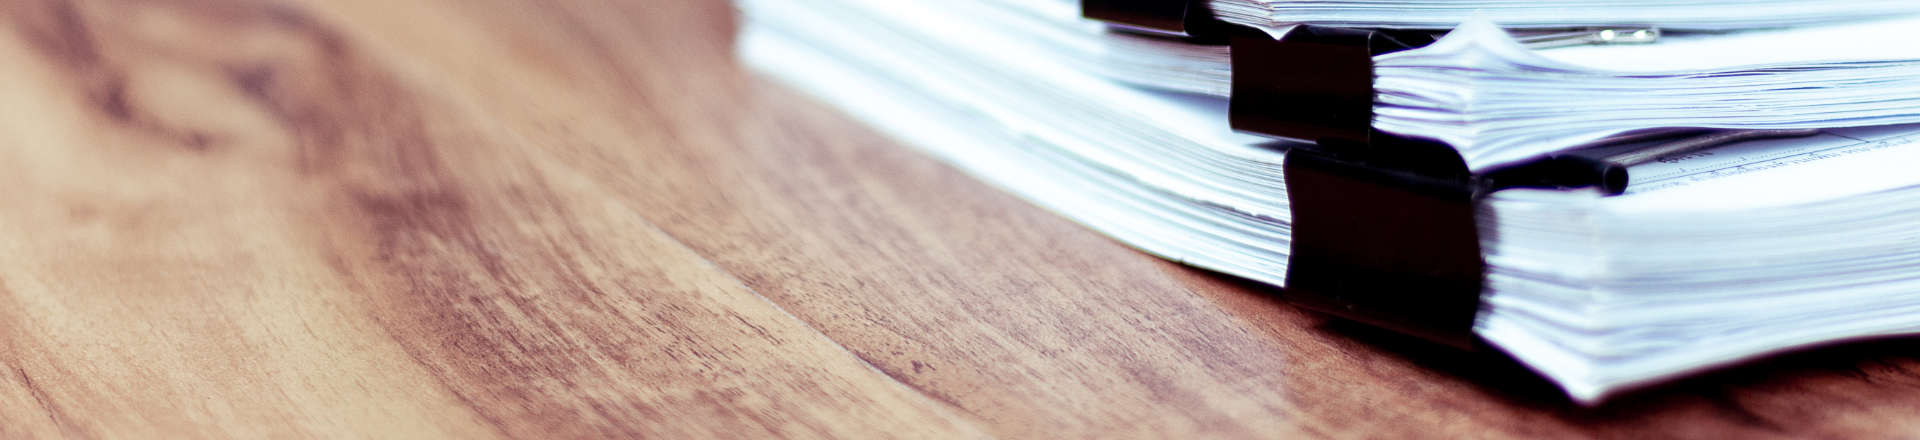 Pile of contract forms on wooden desk